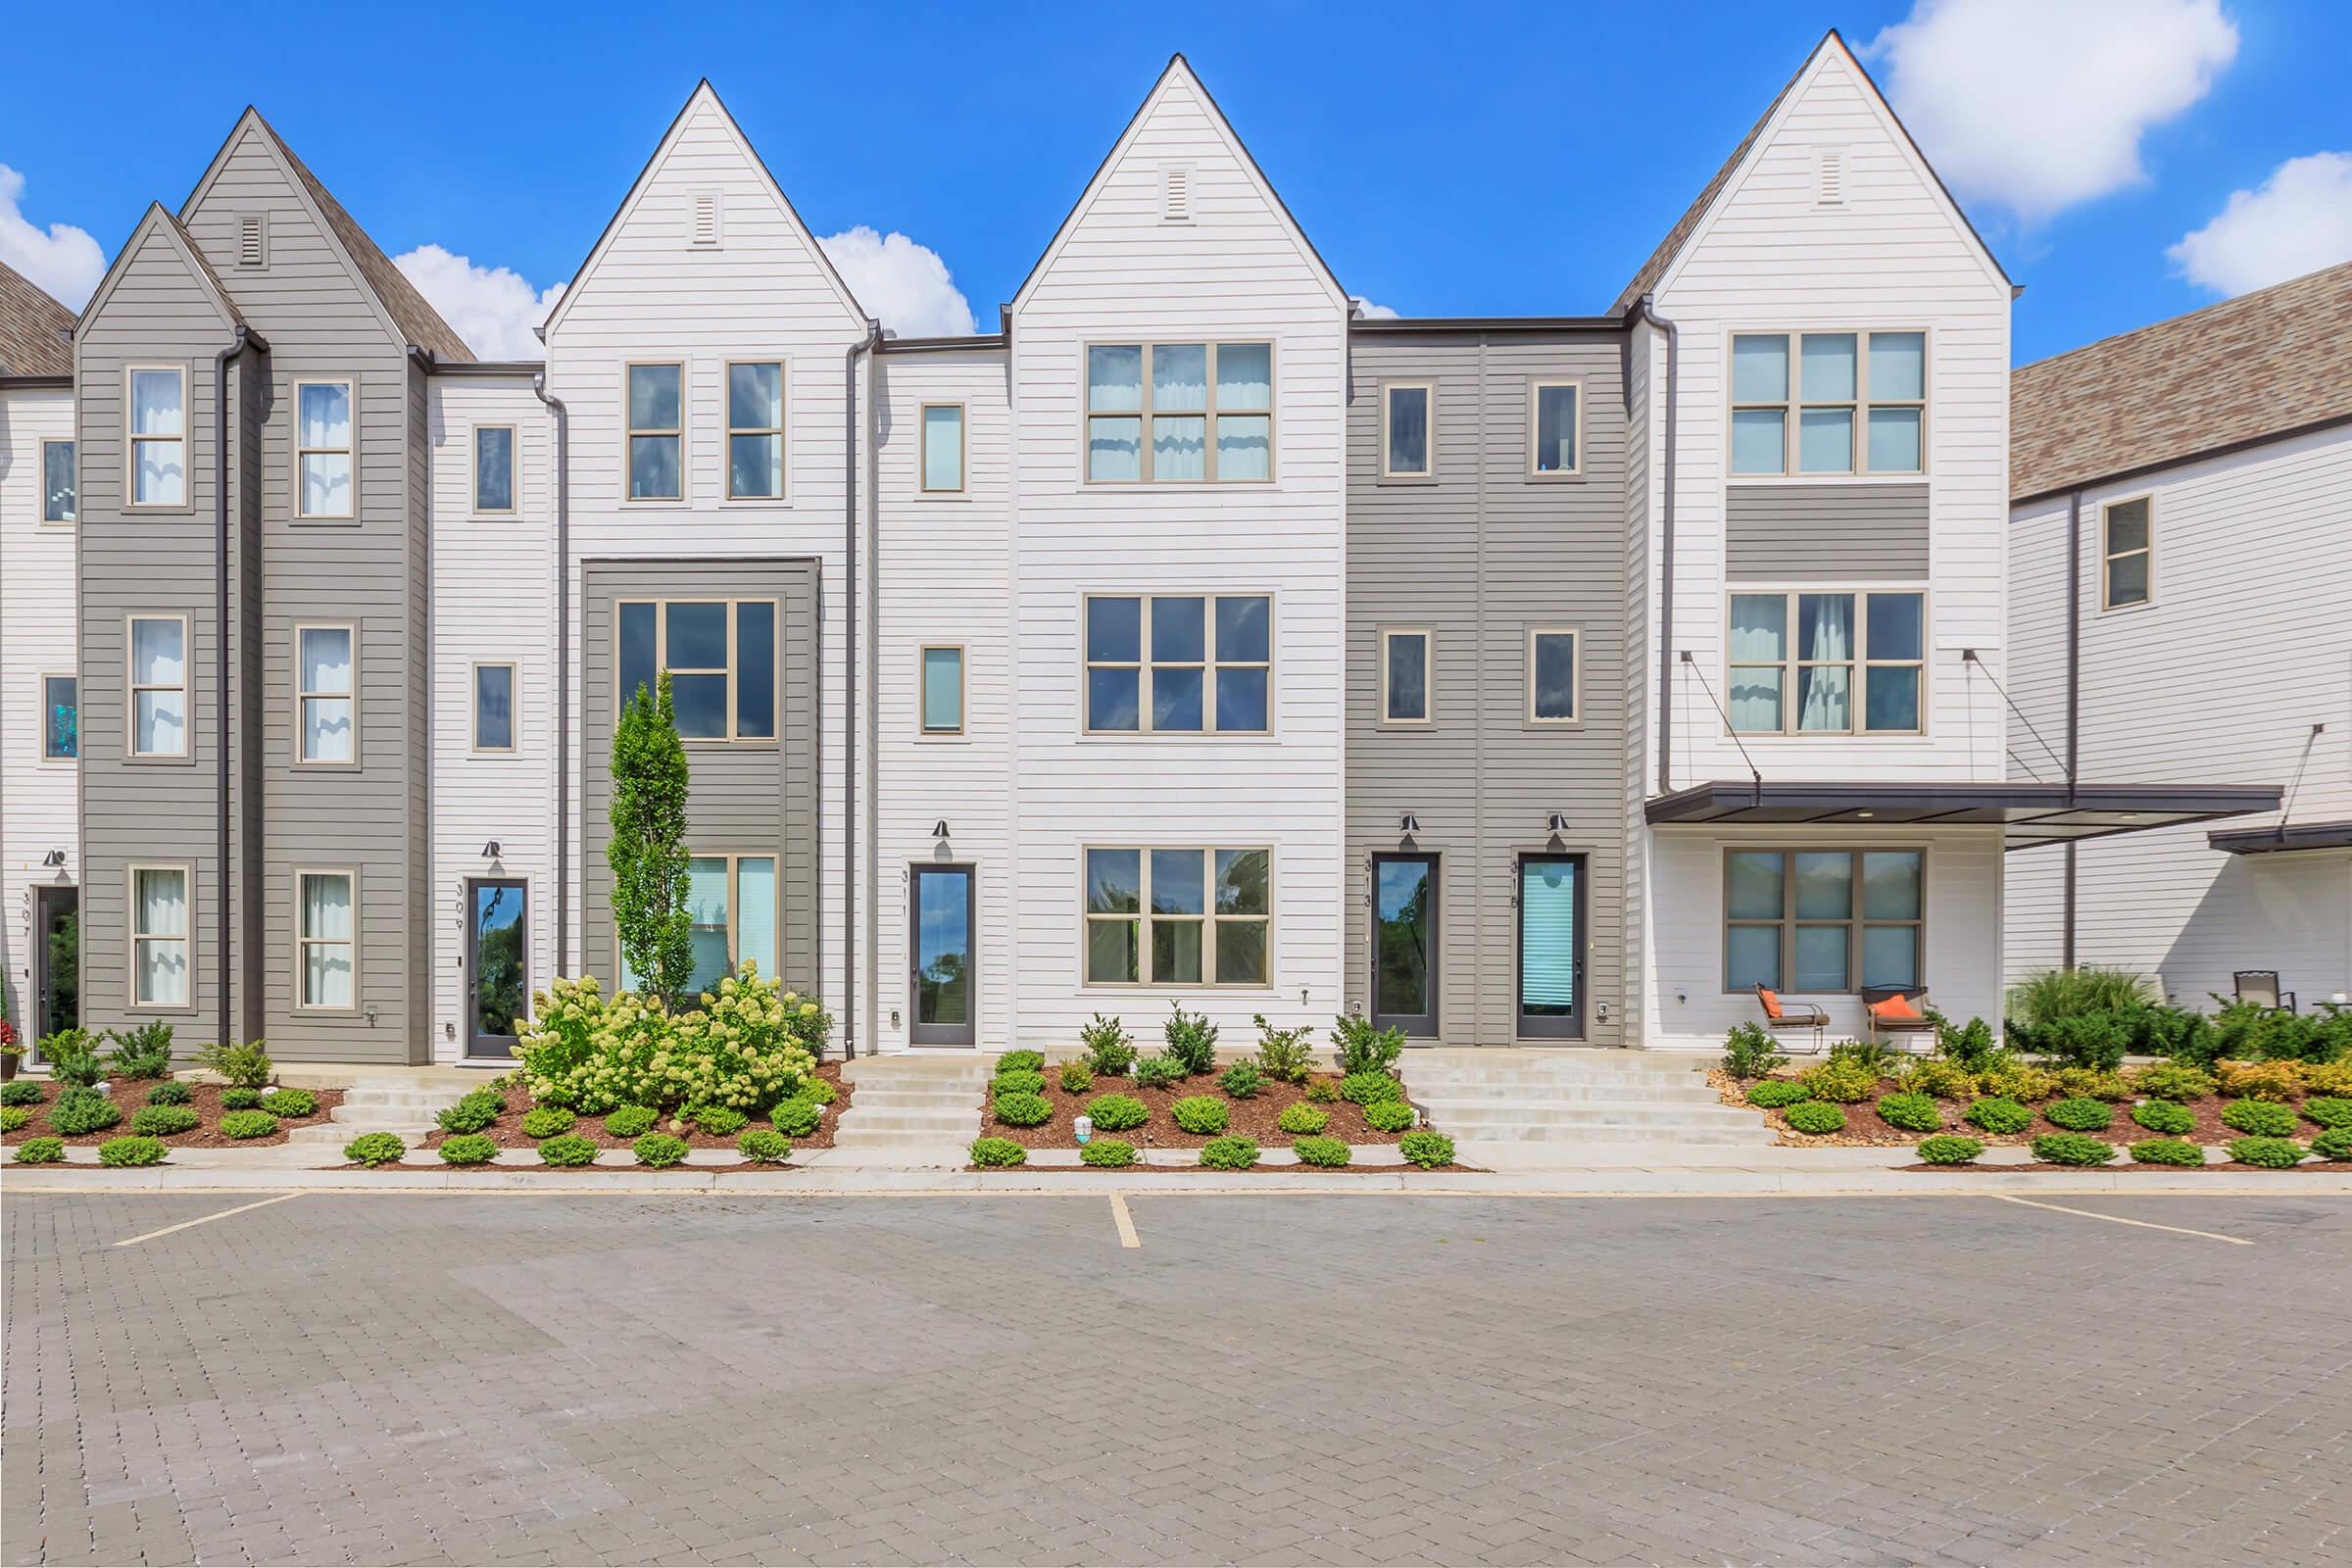 Townhomes for Rent in Nashville, TN